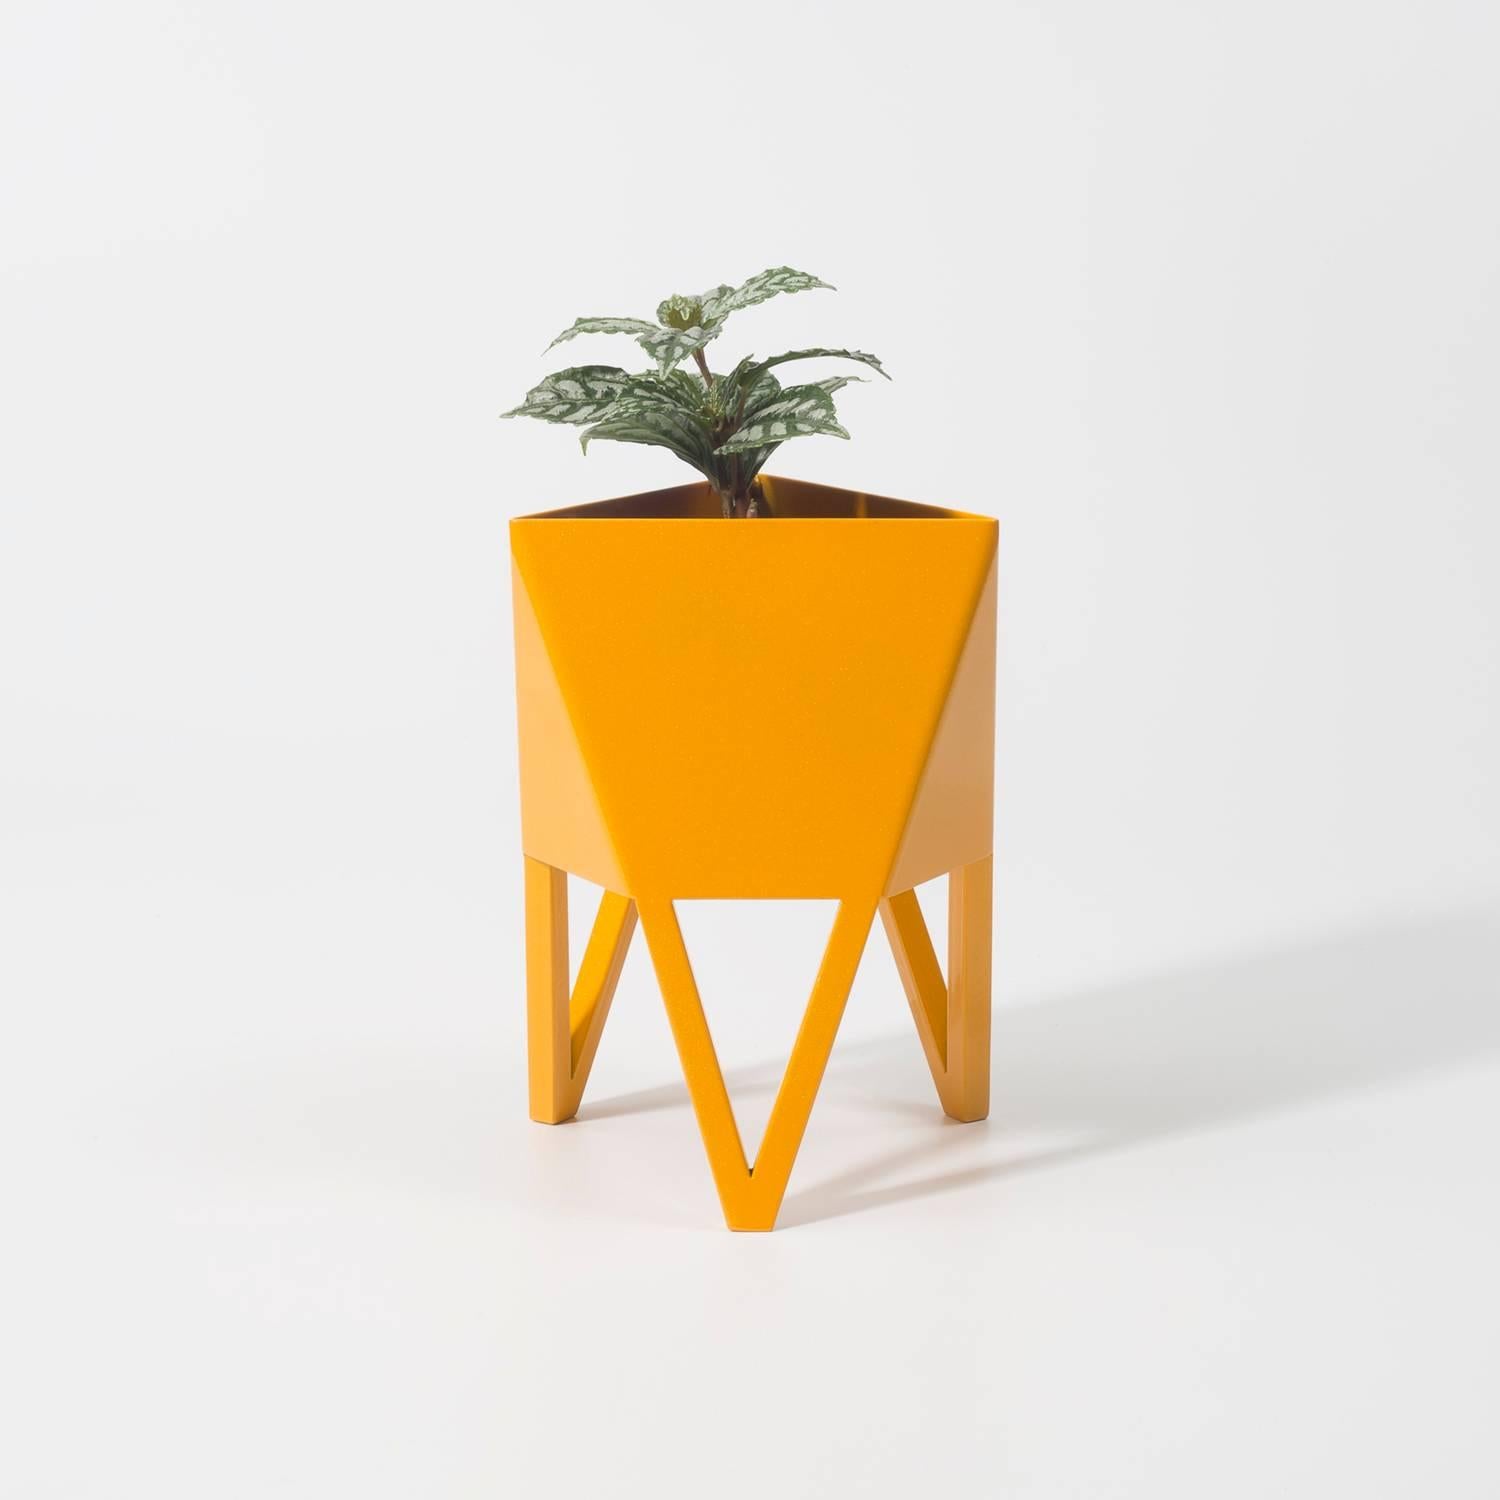 Deca Planter in Glossy White Steel, Small, by Force/Collide 3